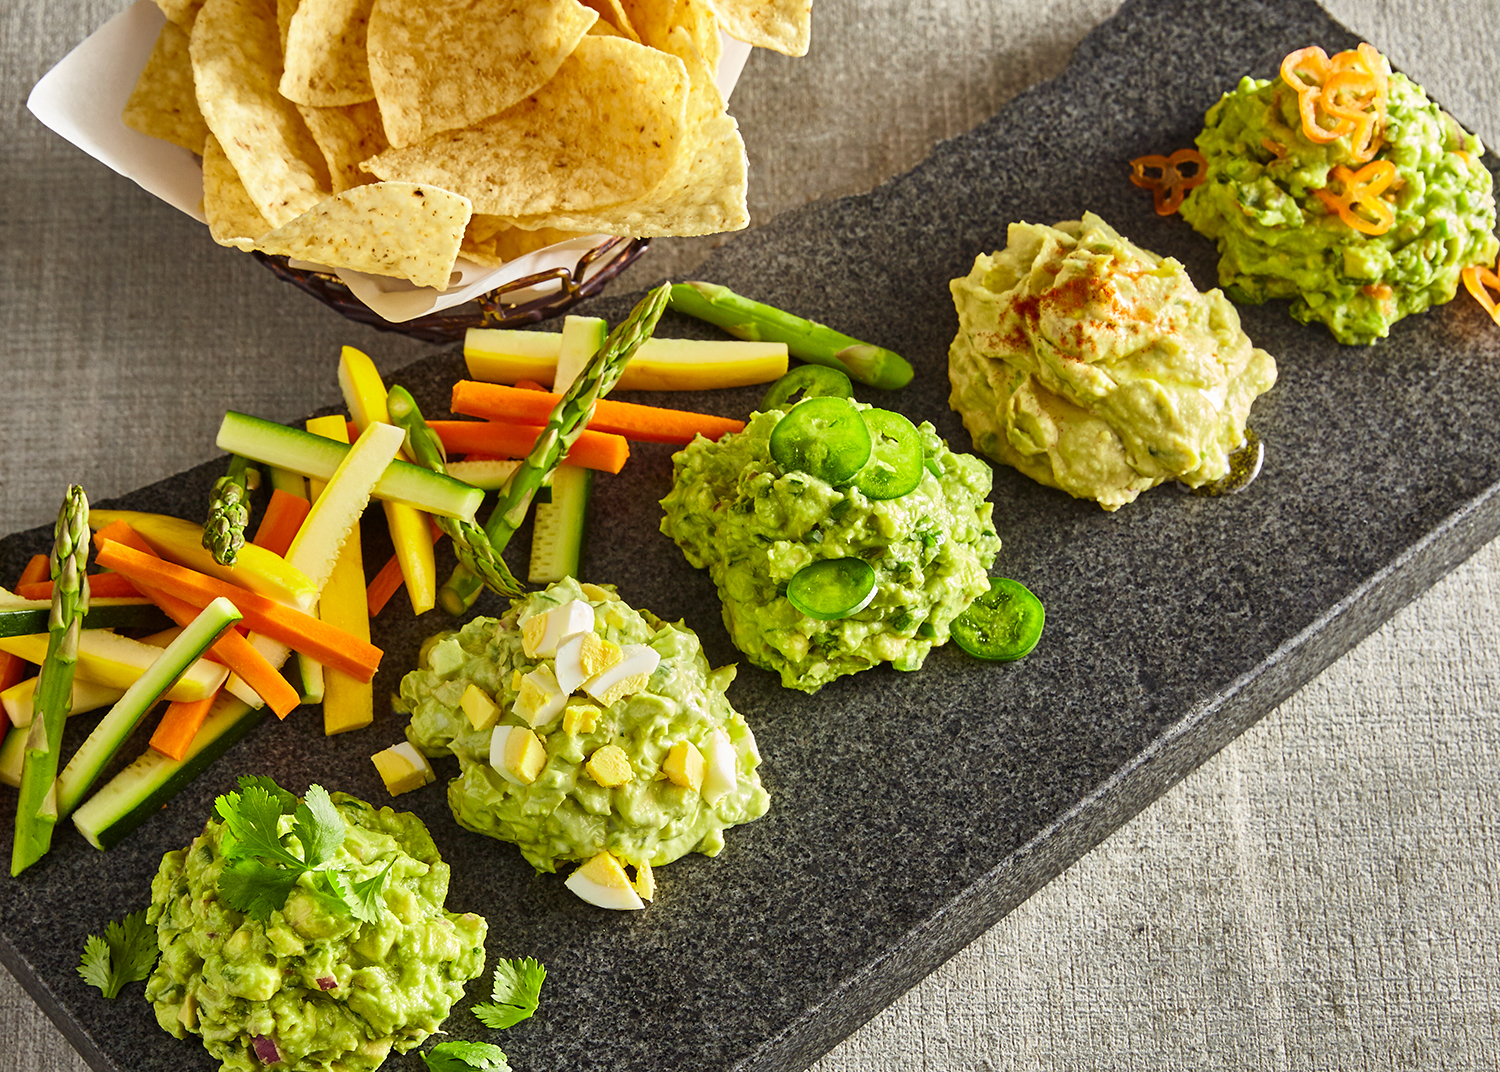 AvoEatery Featuring Avocados From Mexico To Drive Avo-Innovation on Menus Nationwide